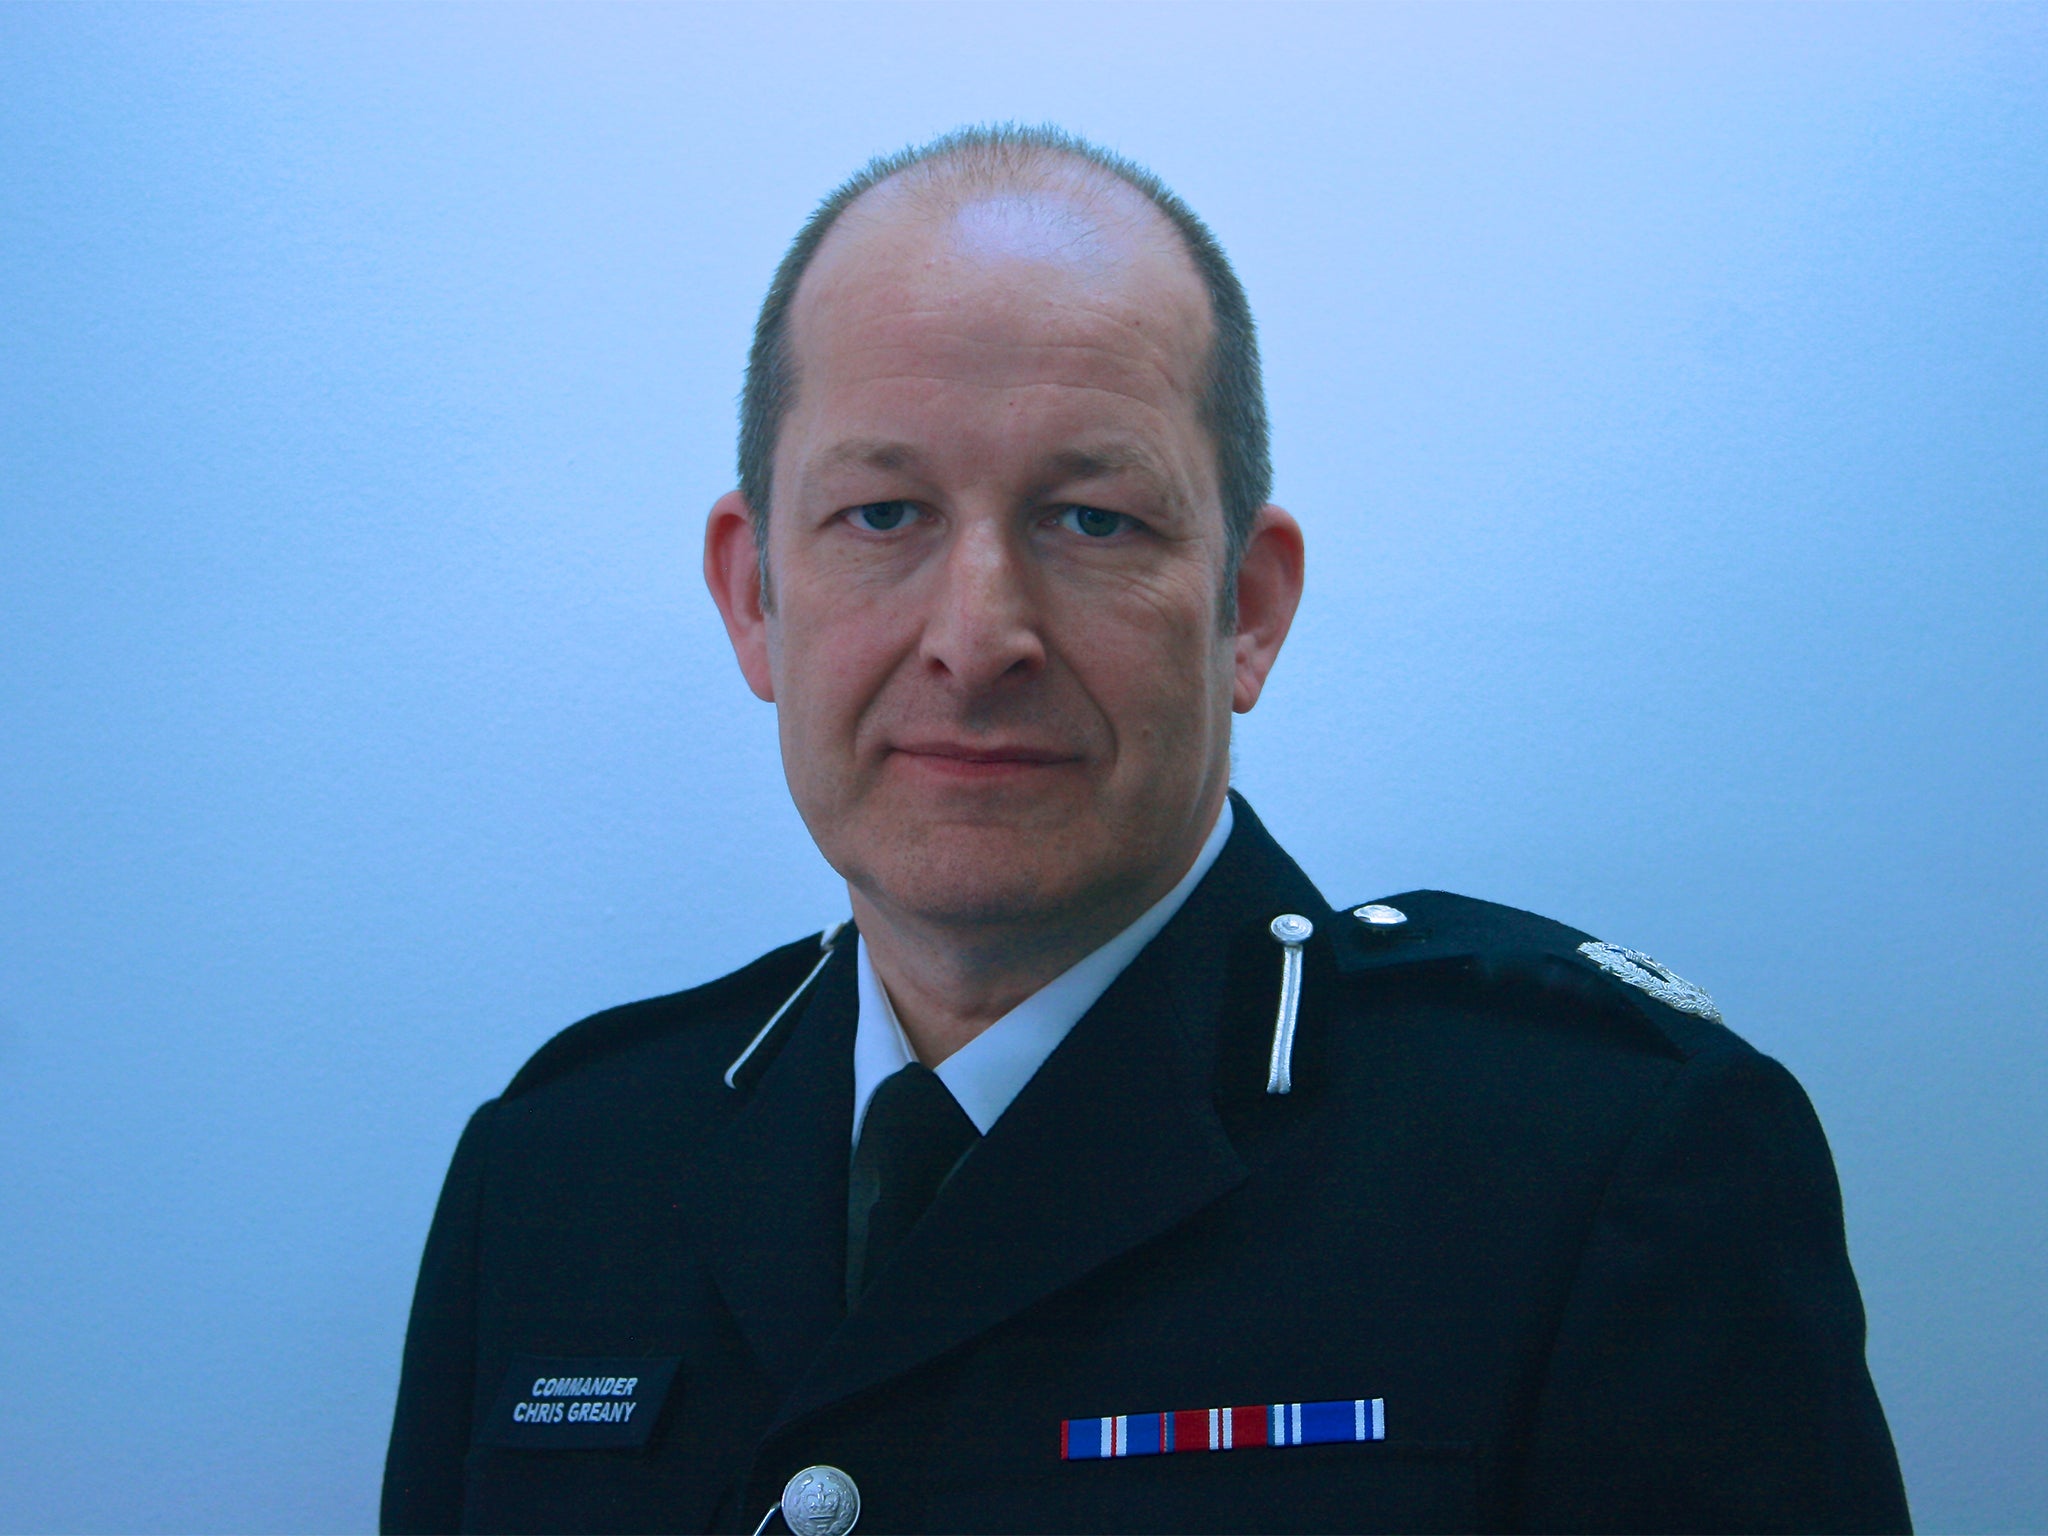 Commander Chris Greany, the national police coordinator for economic crime from the City of London police